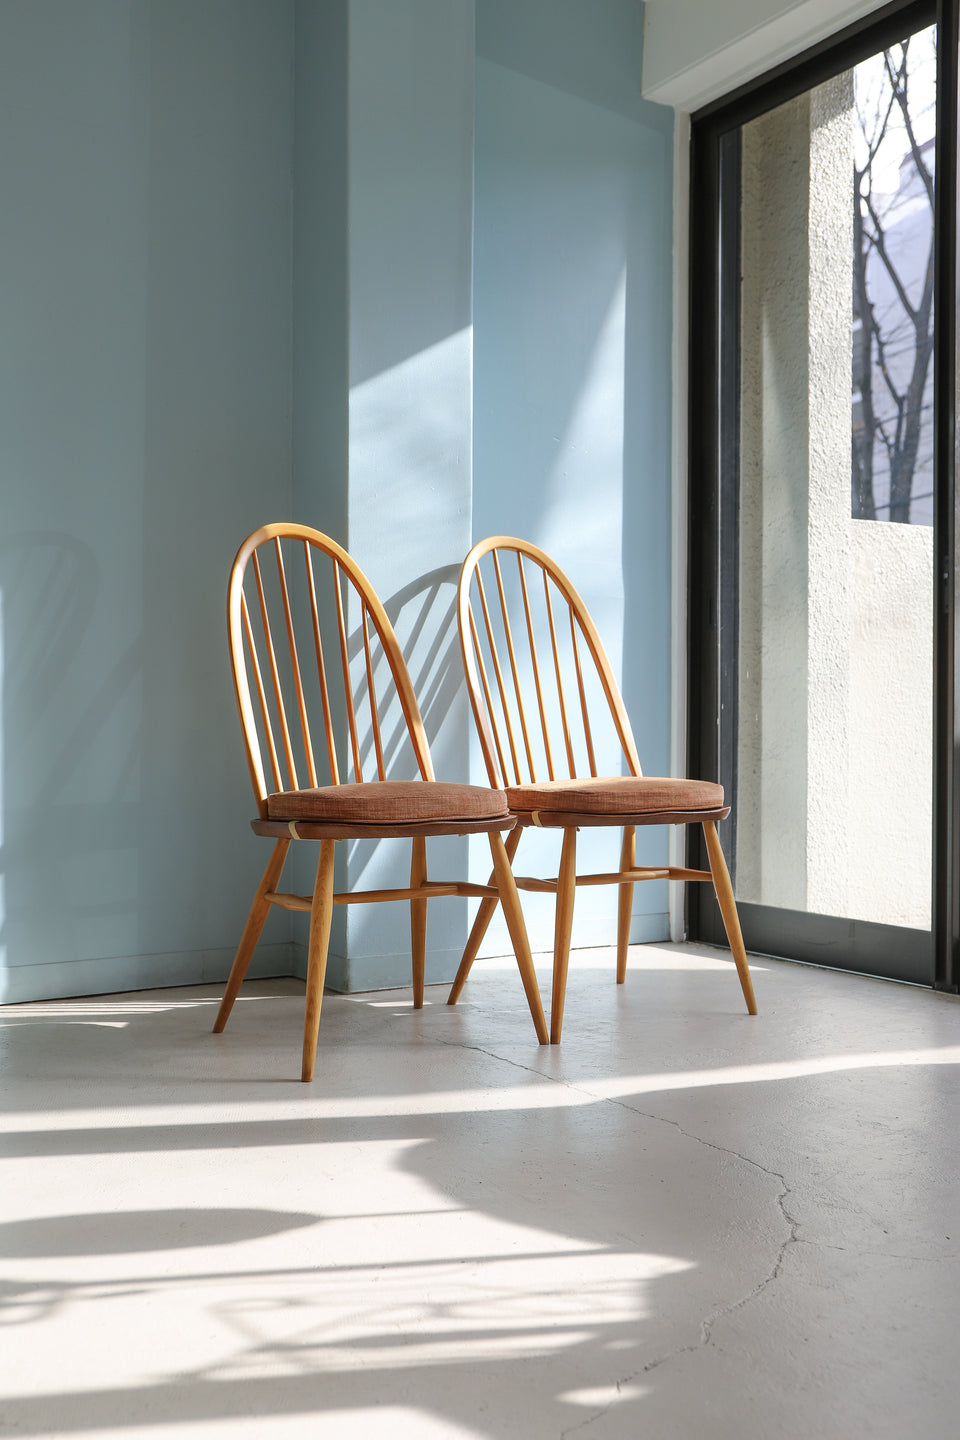 Ercol Quaker Chair UK Traditional Design/イギリス アーコール クゥエーカーチェア ウィンザーチェア ダイニング 椅子